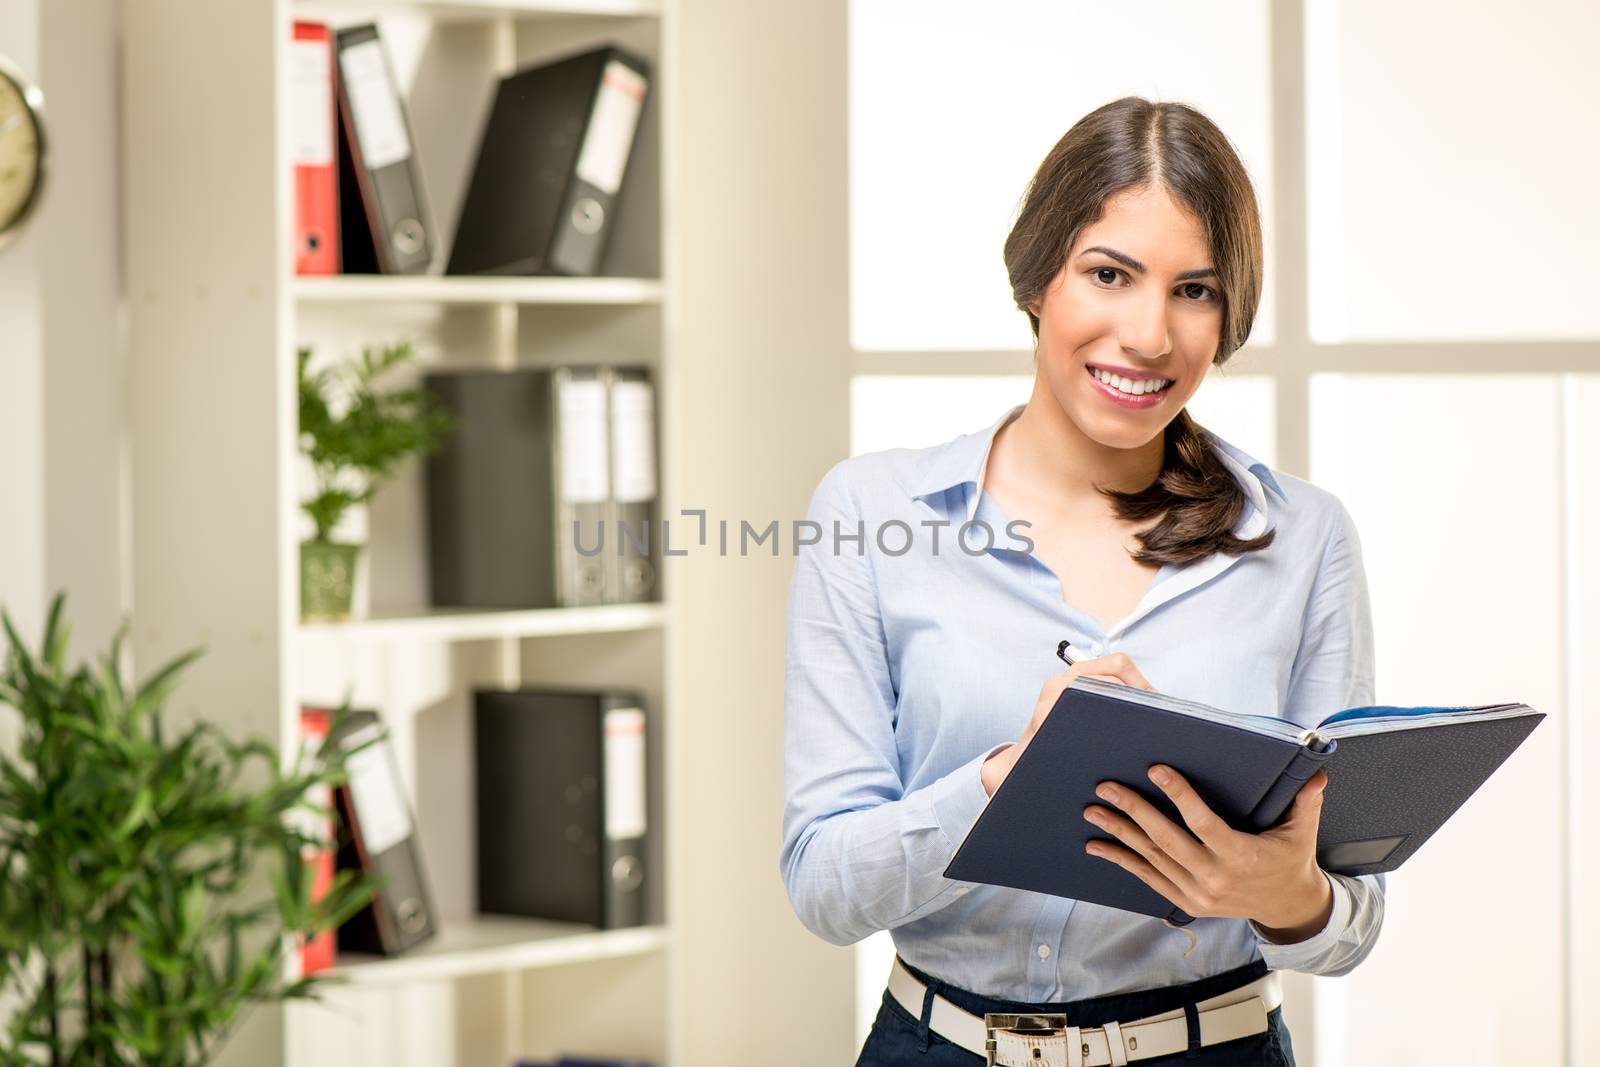 Beautiful young smiling businesswoman standing in office and holding planner. In the background you can see the shelves with binders. Looking at camera.